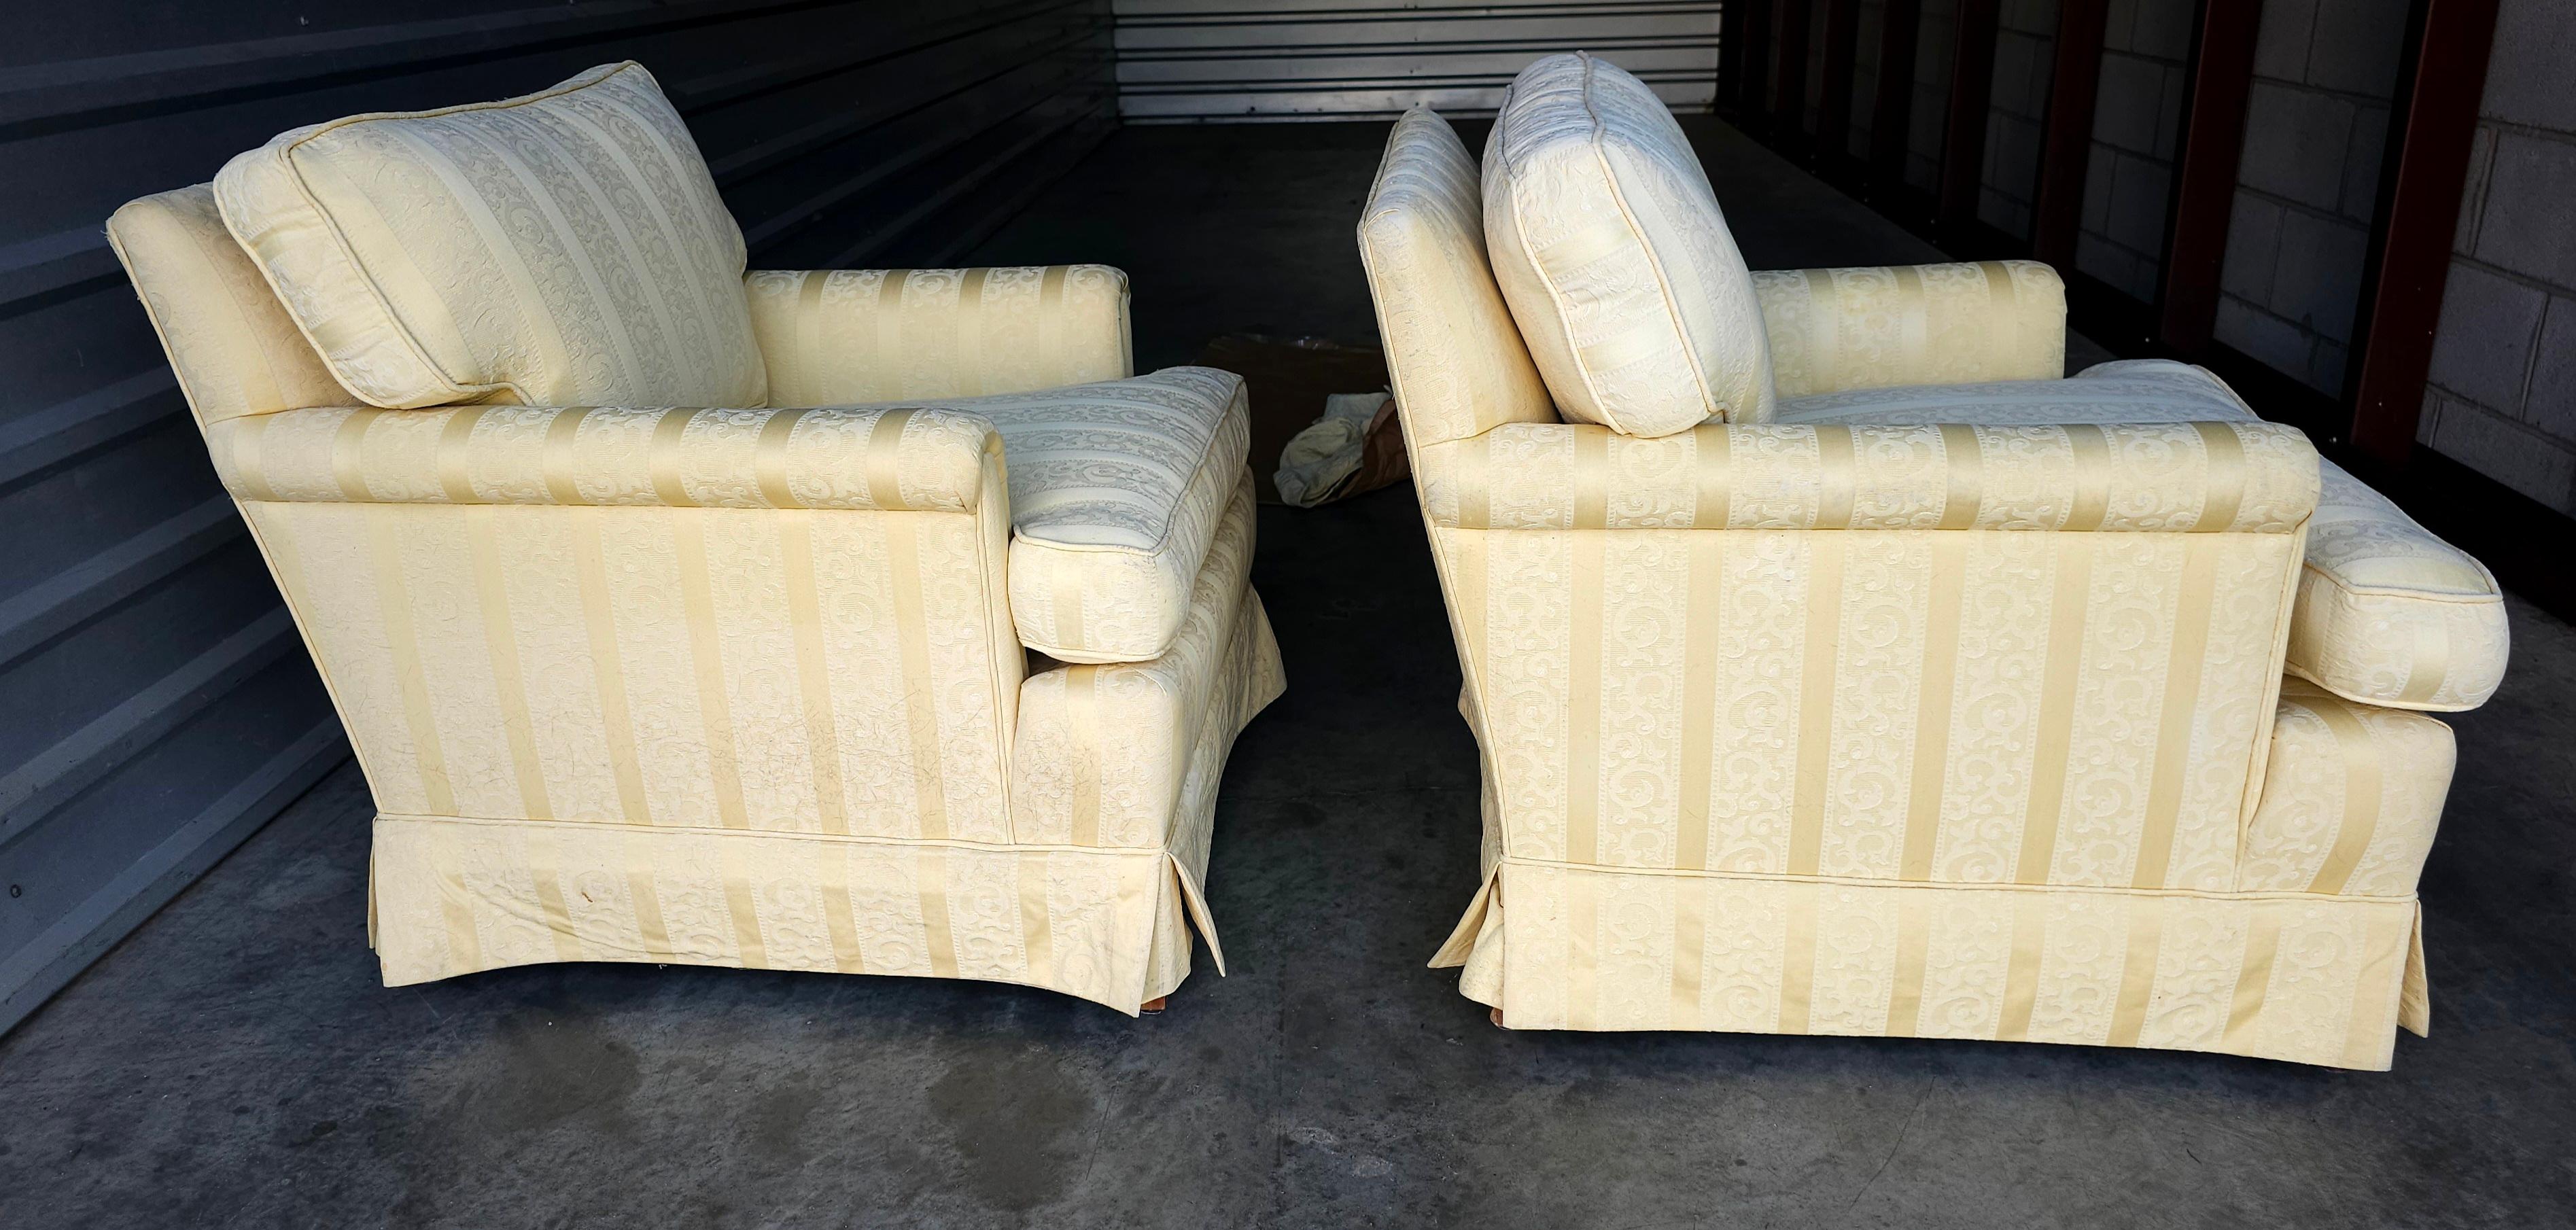 Pair of Mid 20th Century Yellow Upholstered Lounge Chairs In Good Condition For Sale In Germantown, MD